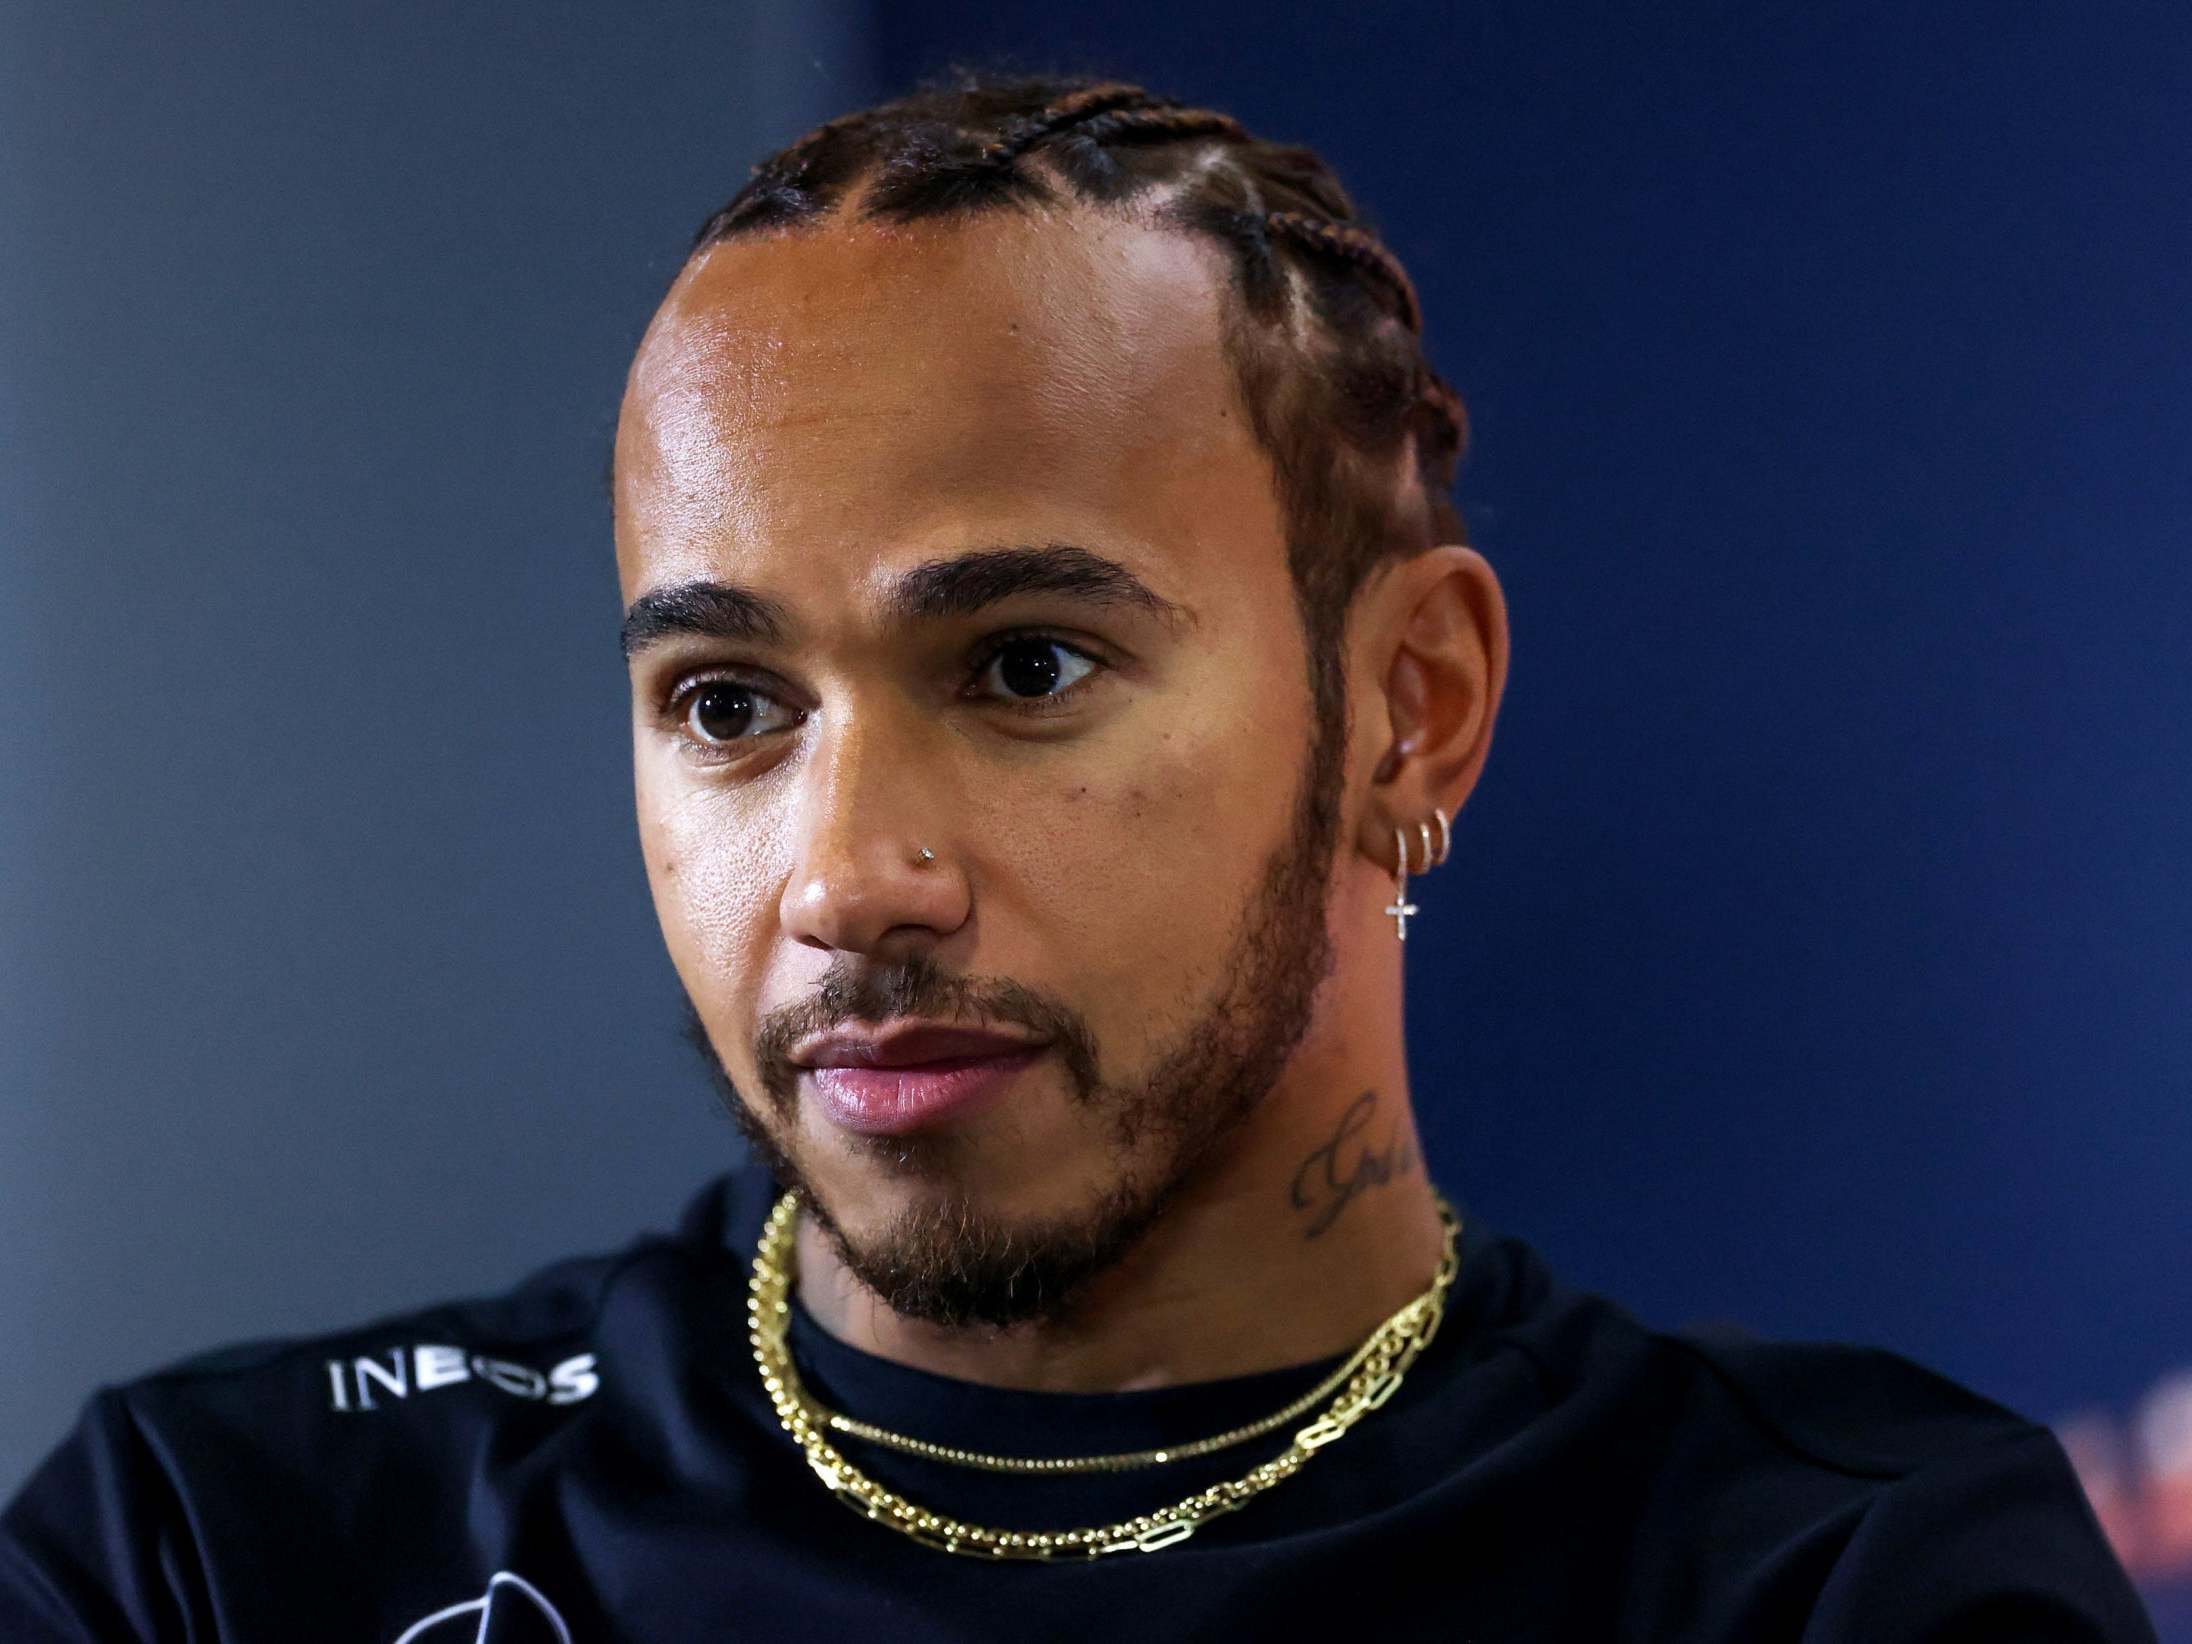 Lewis Hamilton admits he is both sad and disappointed by the comments